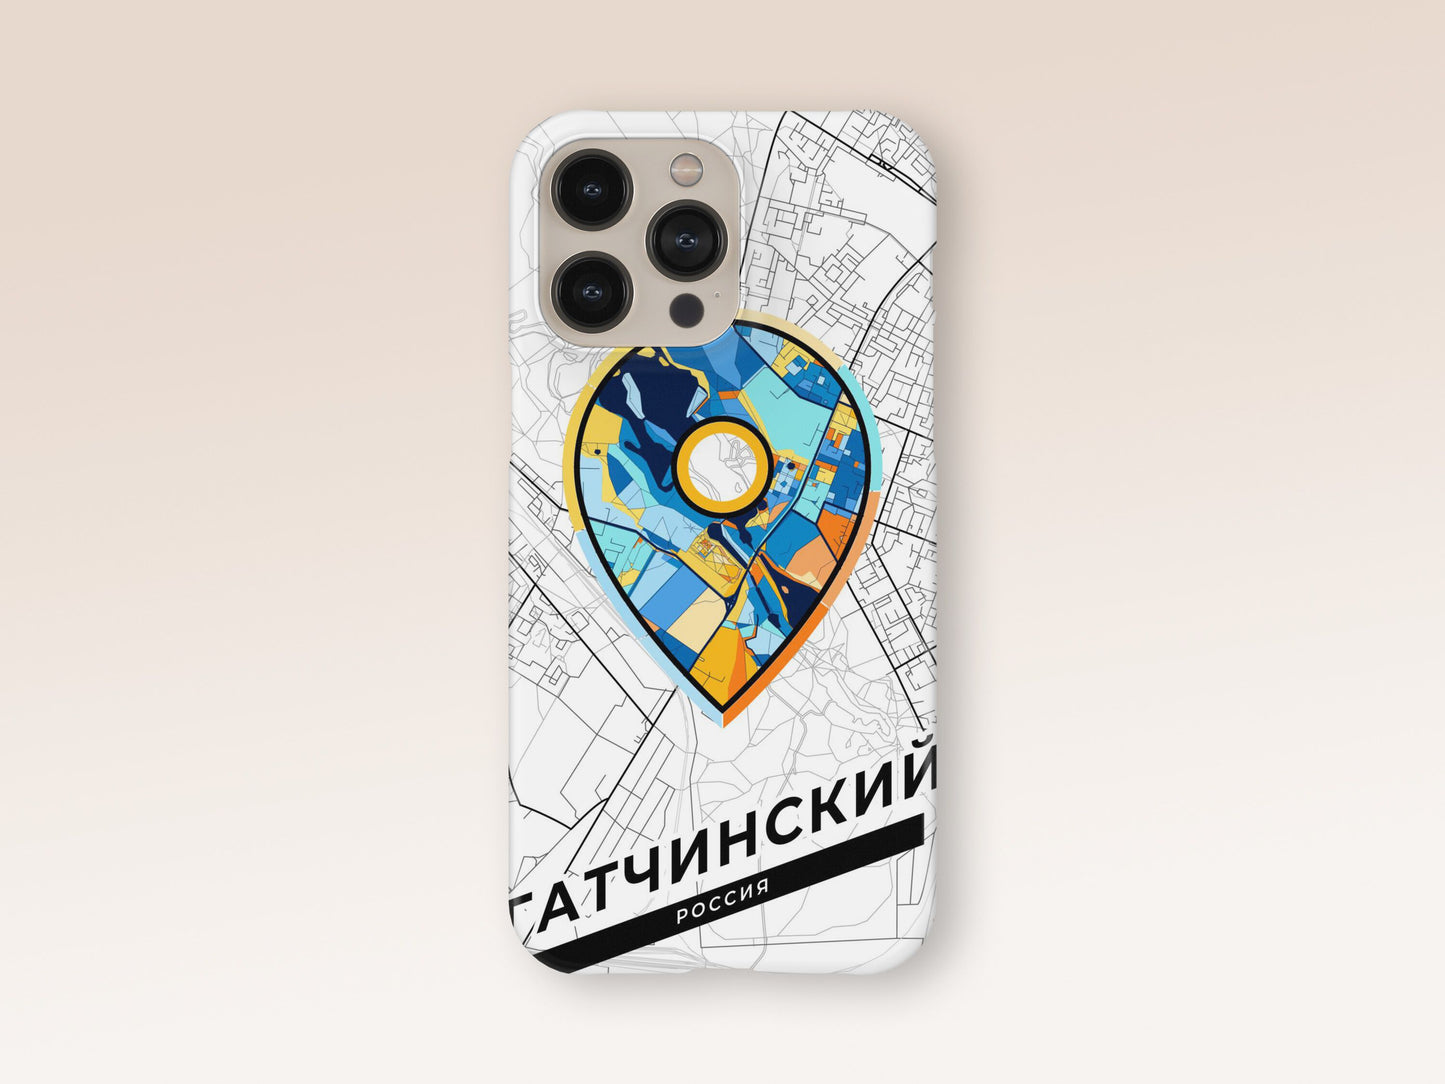 Gatchina Russia slim phone case with colorful icon. Birthday, wedding or housewarming gift. Couple match cases. 1